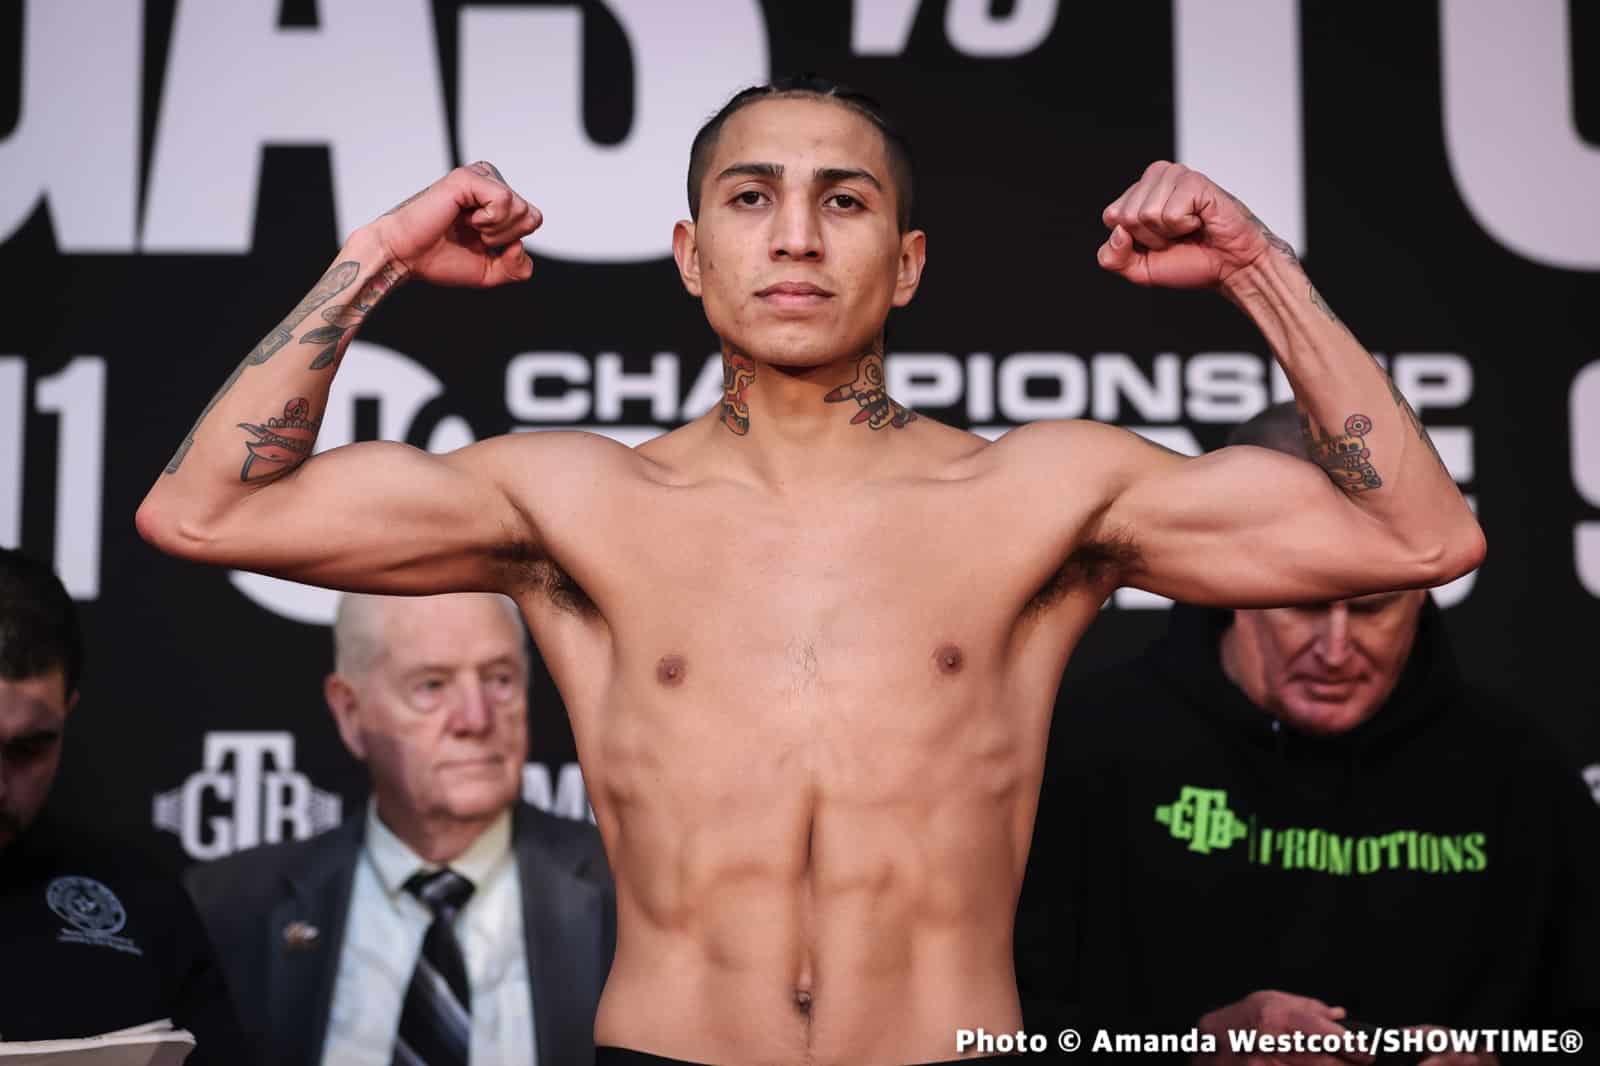 Vargas vs Foster Showtime Fight Results